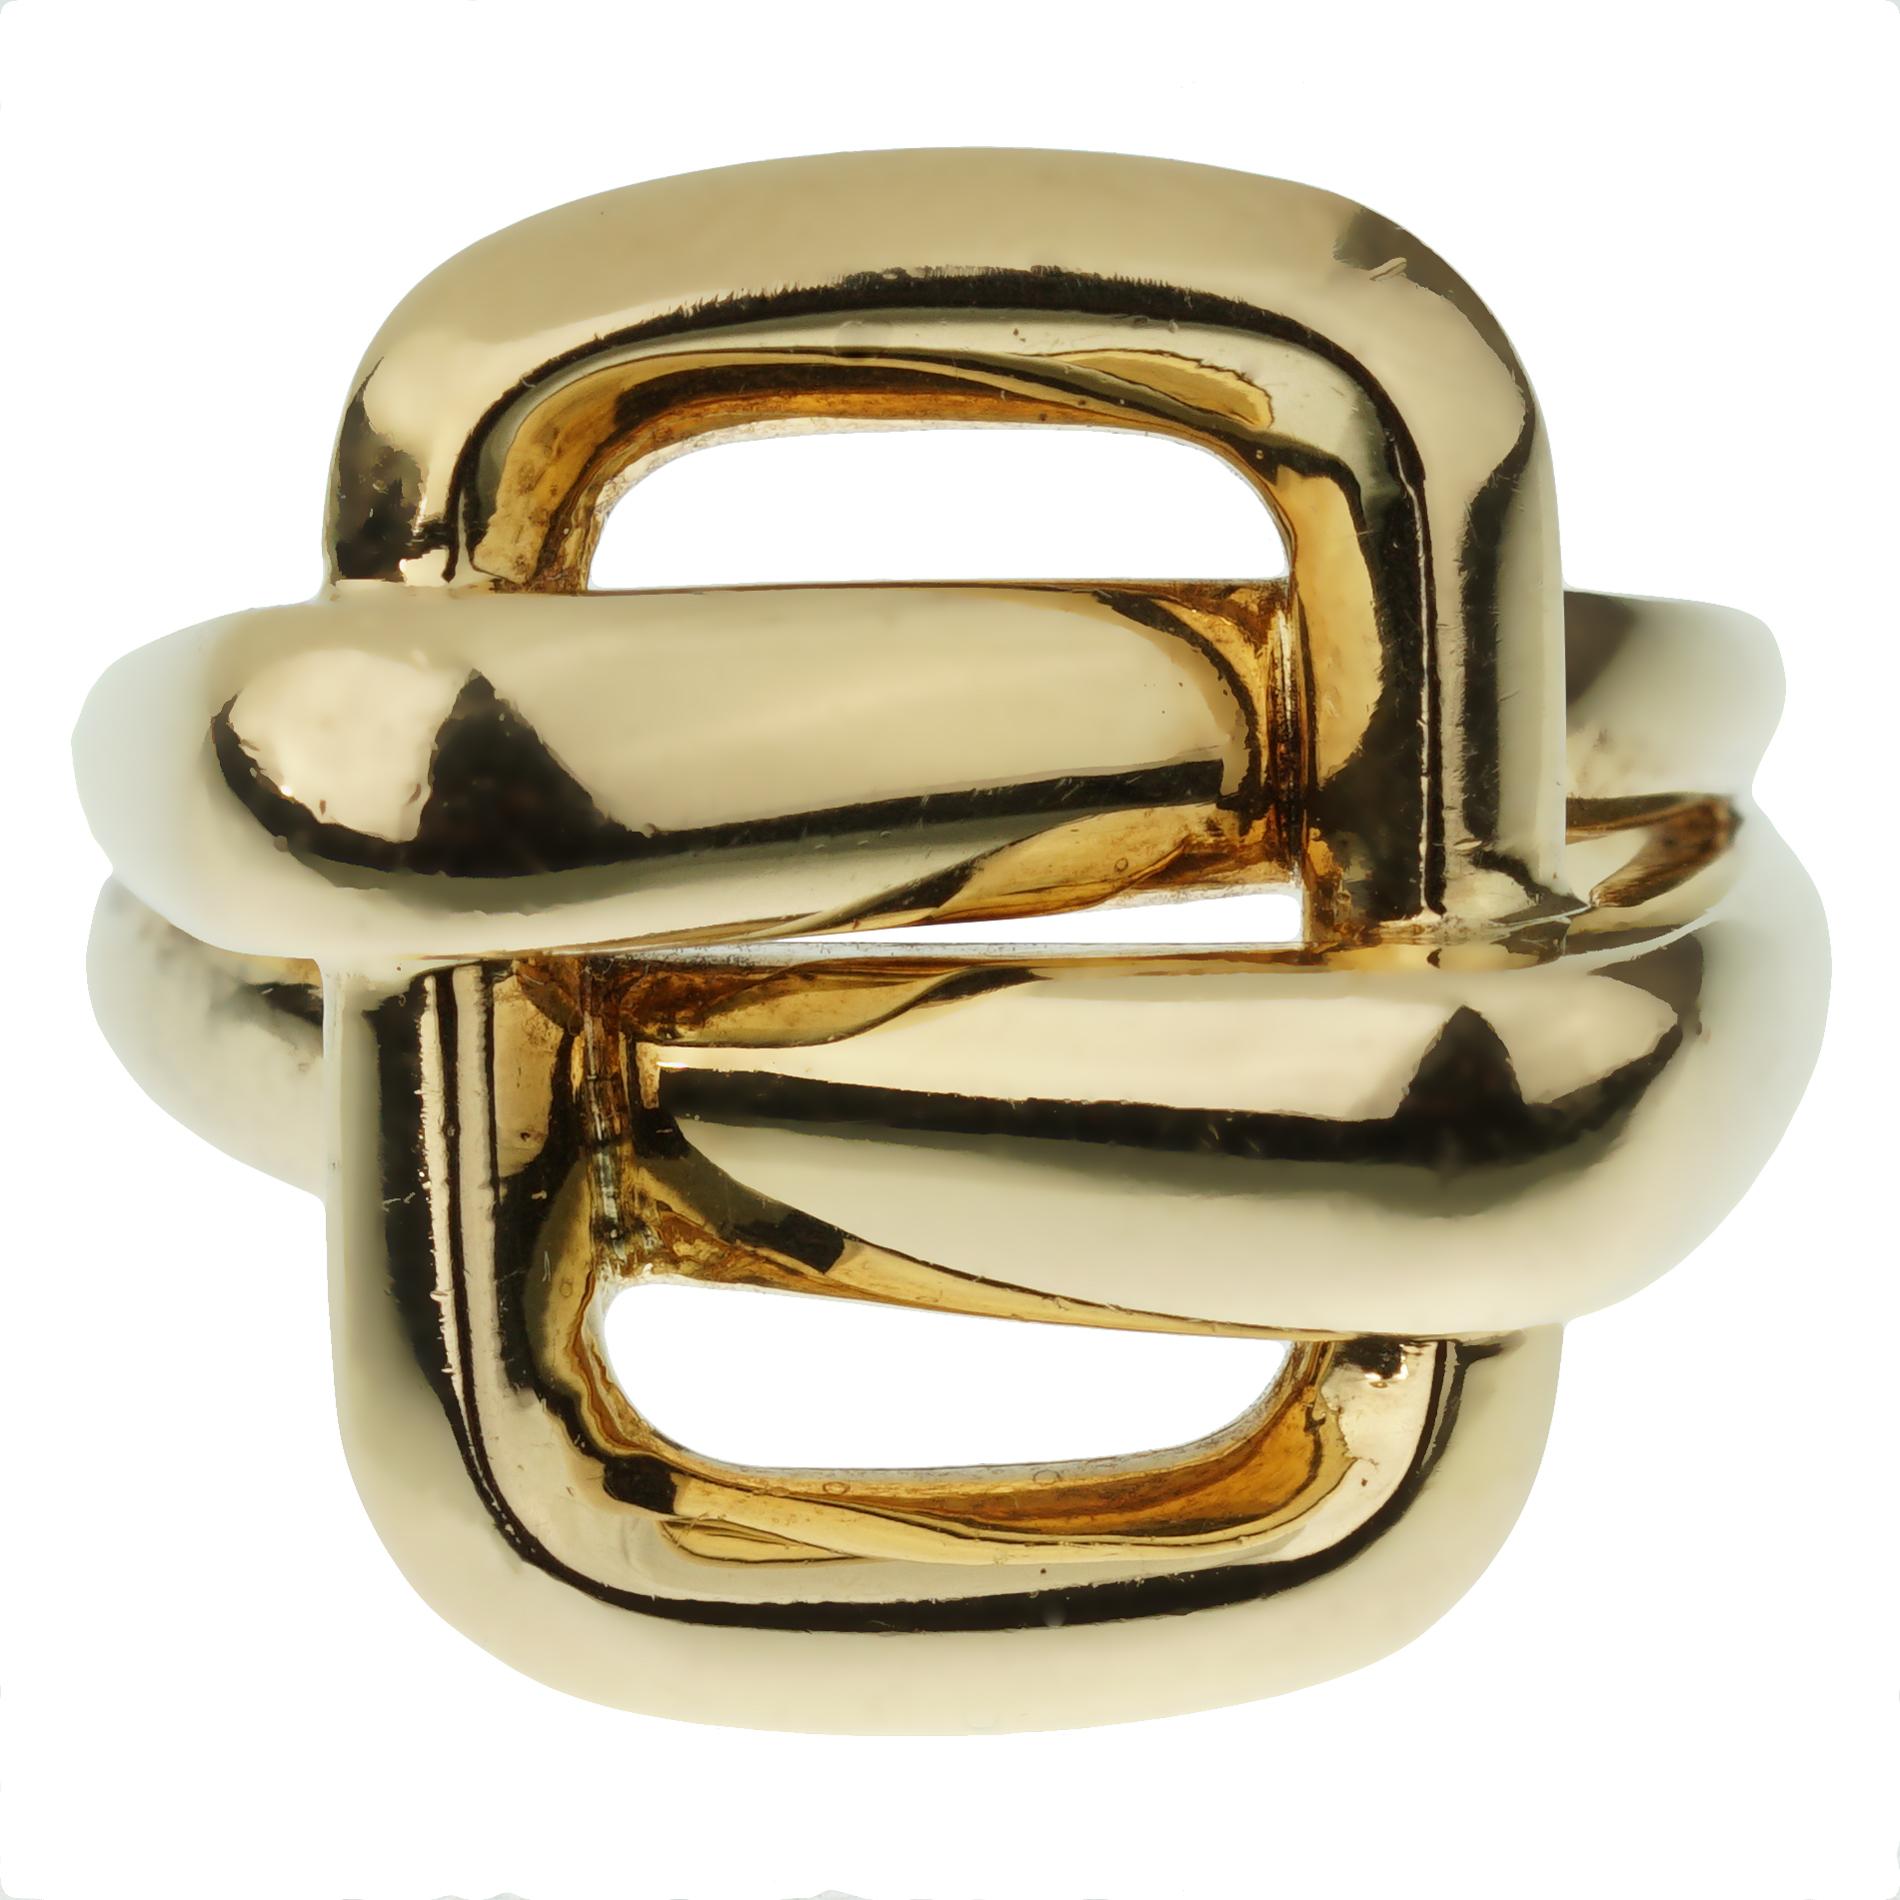 A fabulous Van Cleef & Arpels yellow gold bypass ring circa 1990s, the ring measures a size 6.